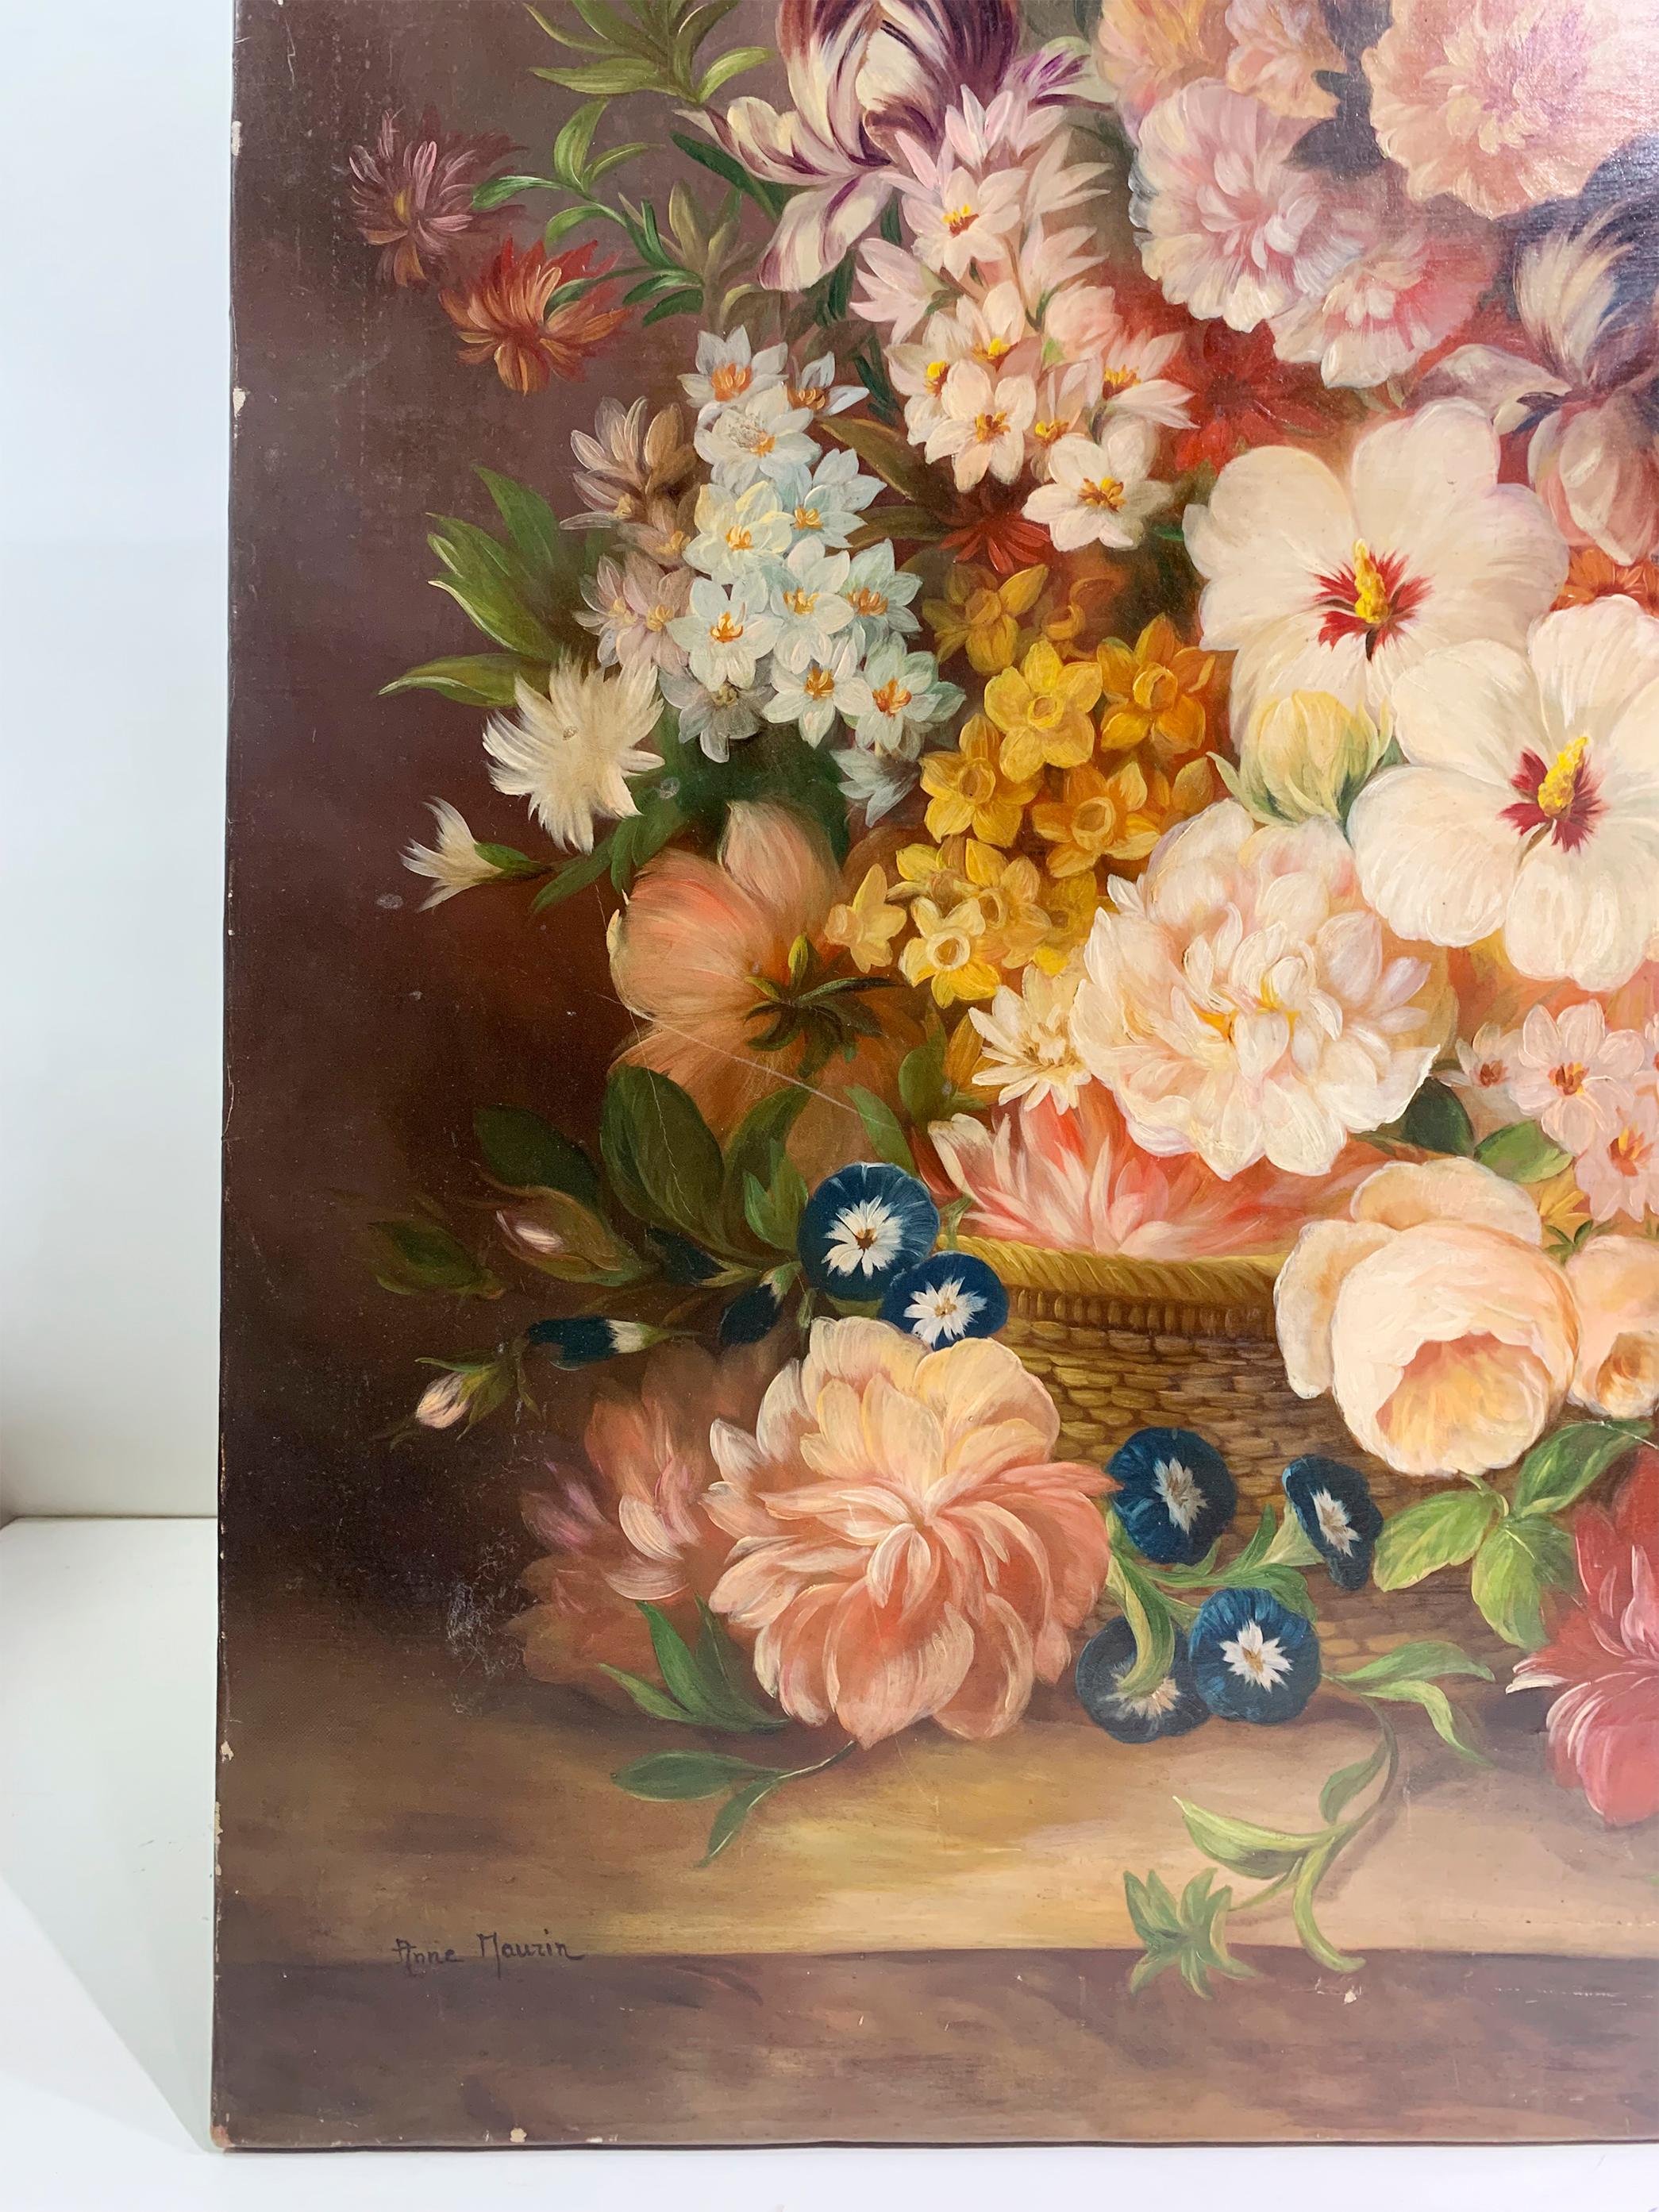 19th Century Floral Still Life Painting - Oil on Canvas - Signed Anne Maurin For Sale 2